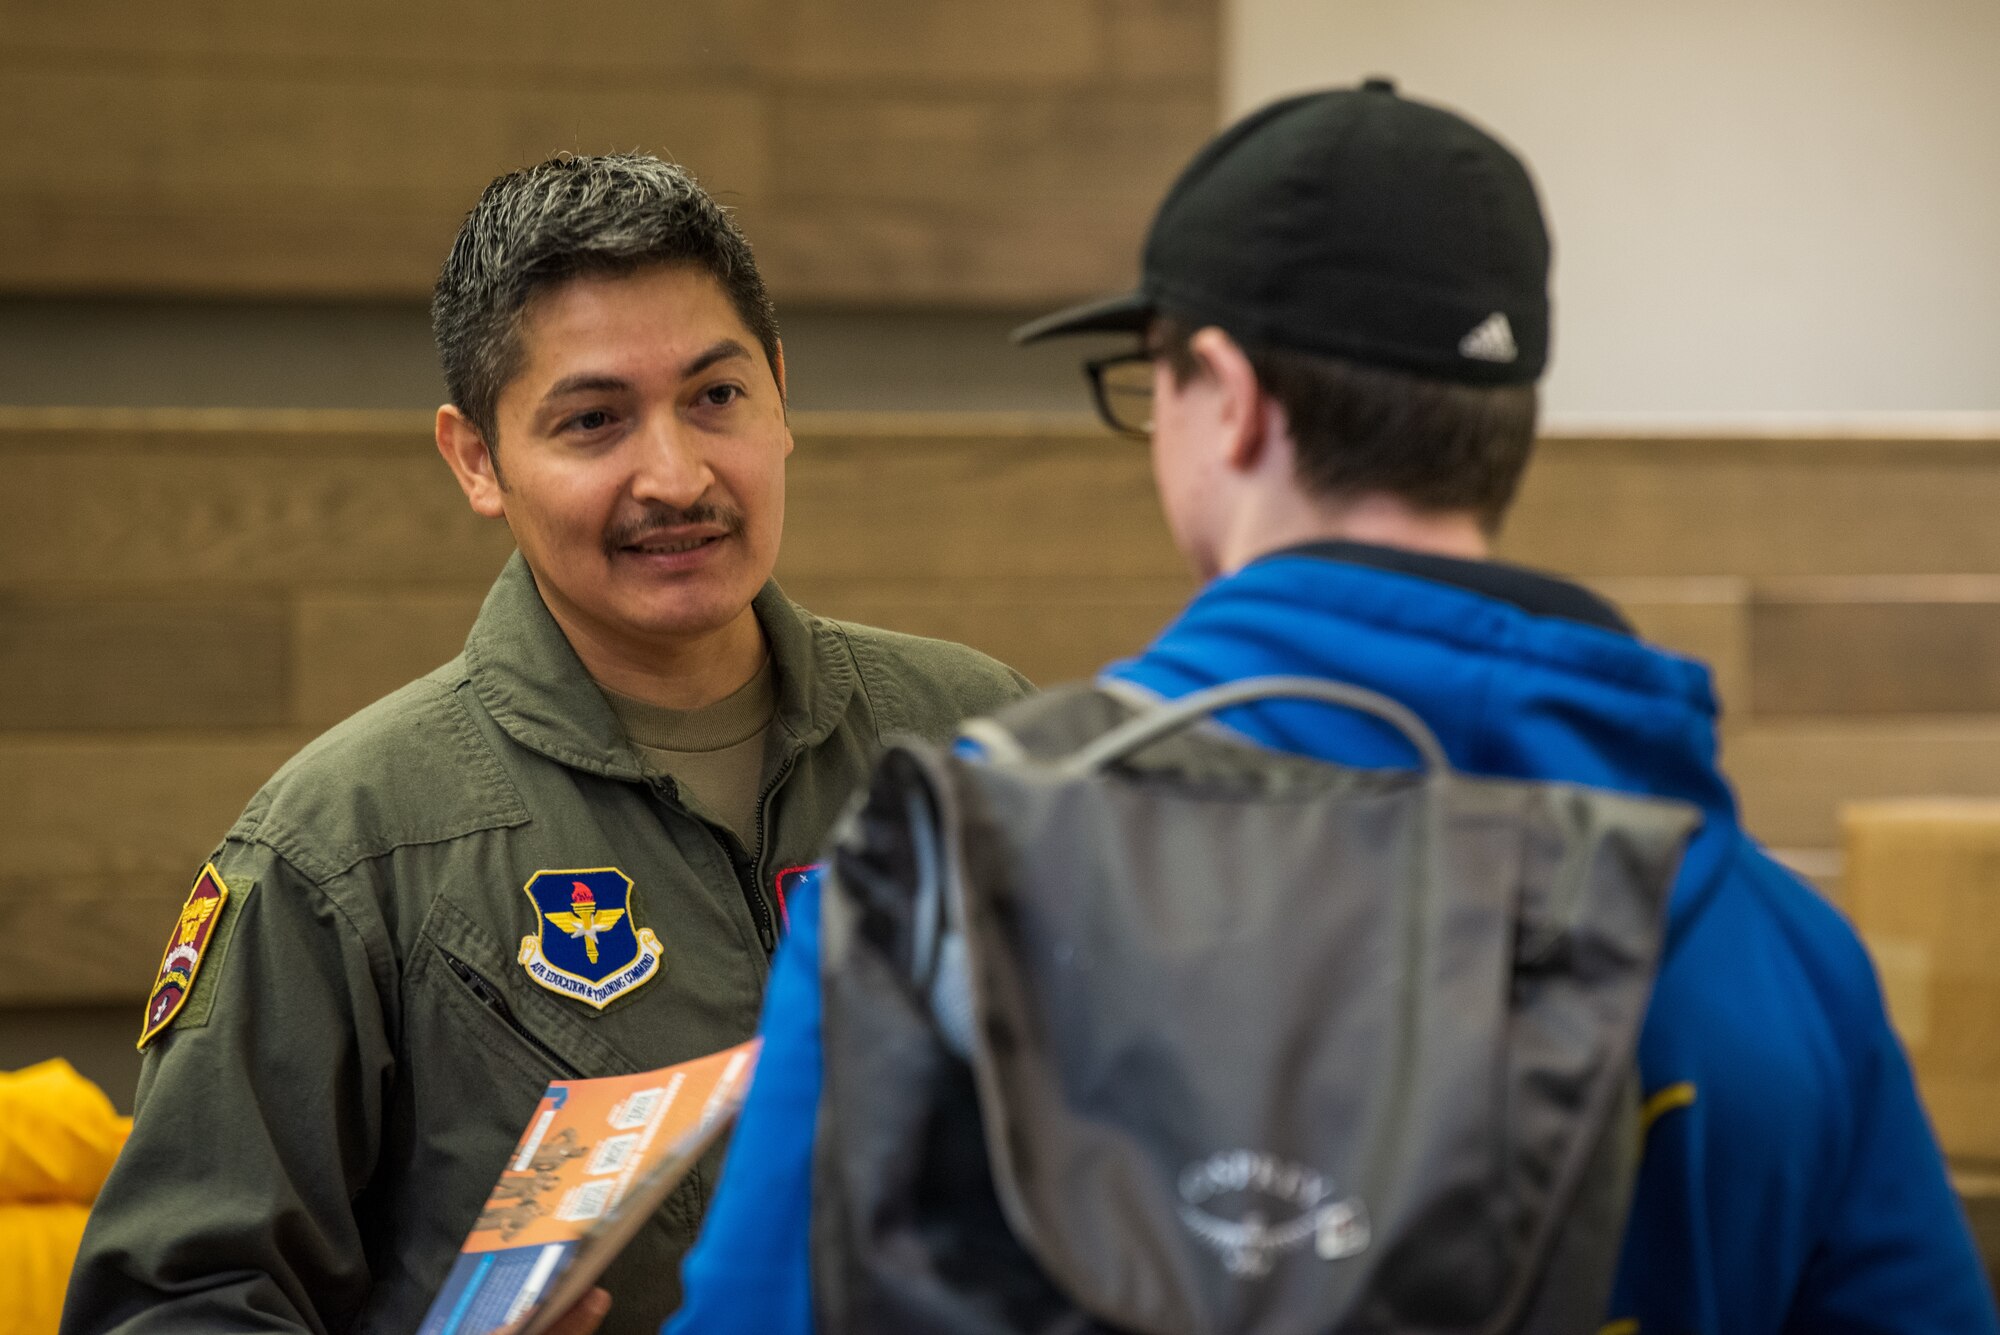 U.S. Air Force Tech. Sgt. Jacob Arellano, outreach recruiter assigned to Air Force Recruiting Service Detachment 1, Joint Base San Antonio-Randolph, Texas, speaks with a student about the Aim High Flight Academy during a recruiting visit to Kodiak High School, in Kodiak, Alaska, Sept. 6, 2023.